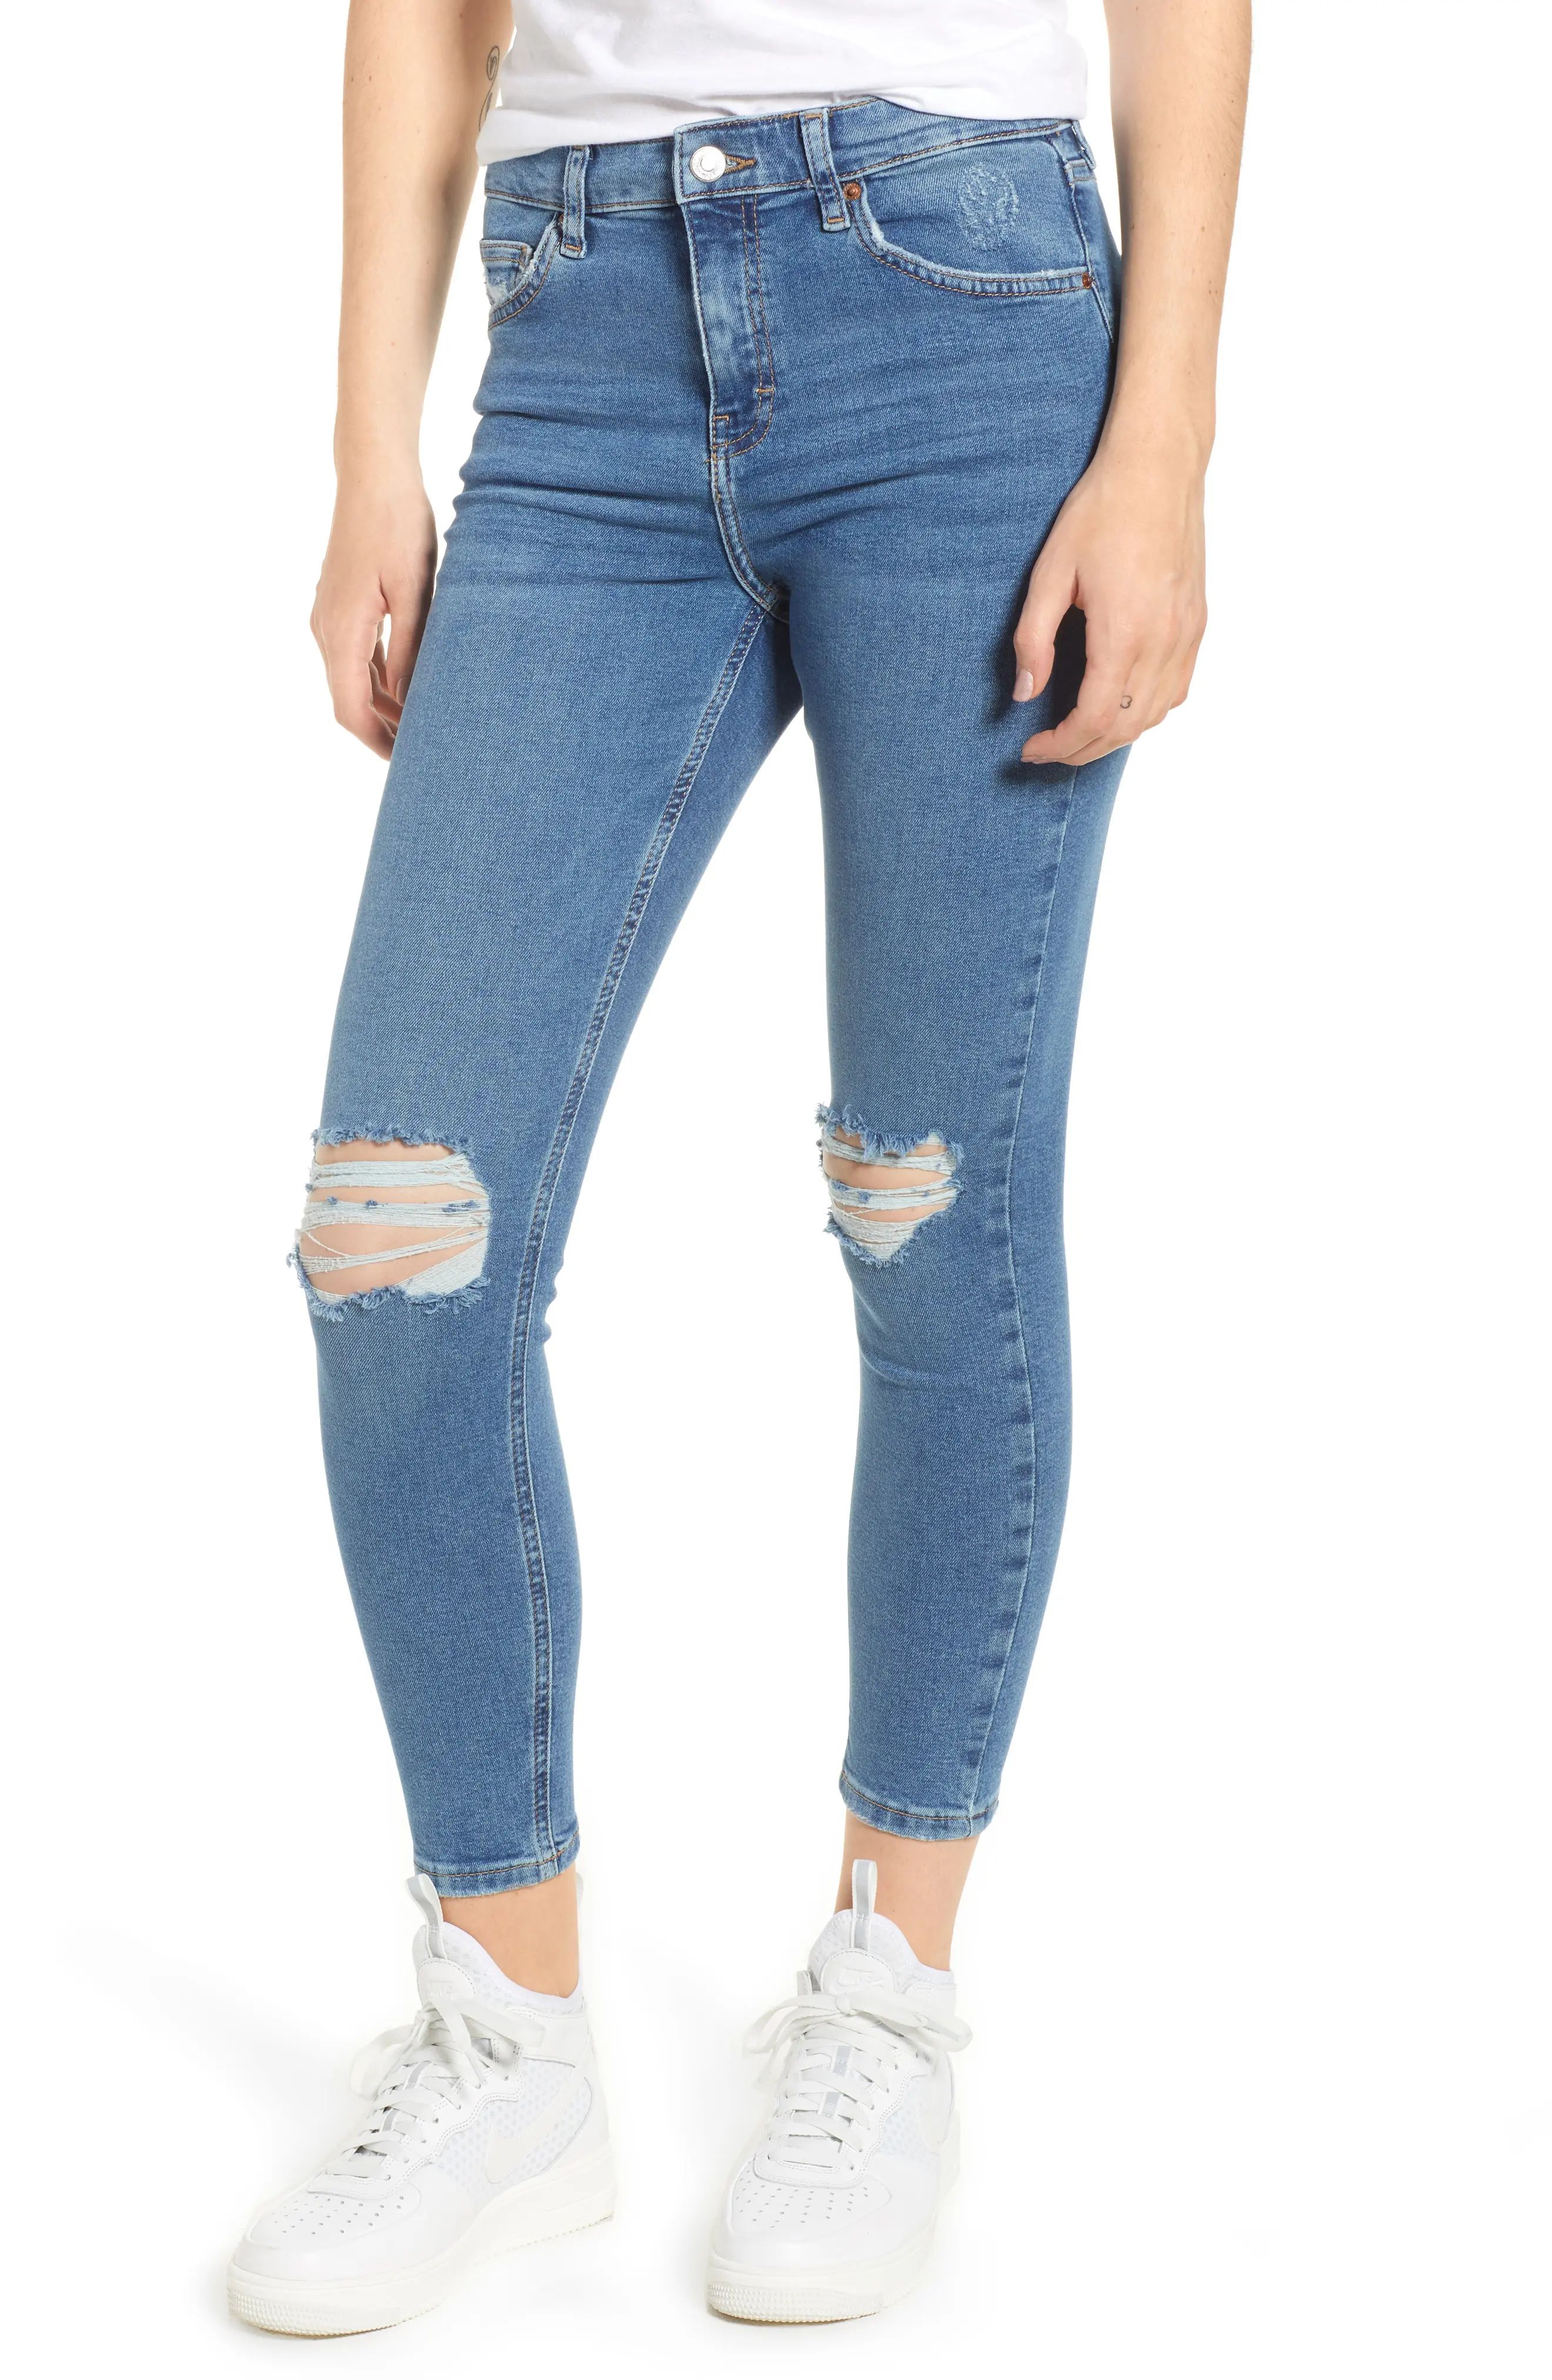 Topshop Jamie Ripped Jeans | Nordstrom